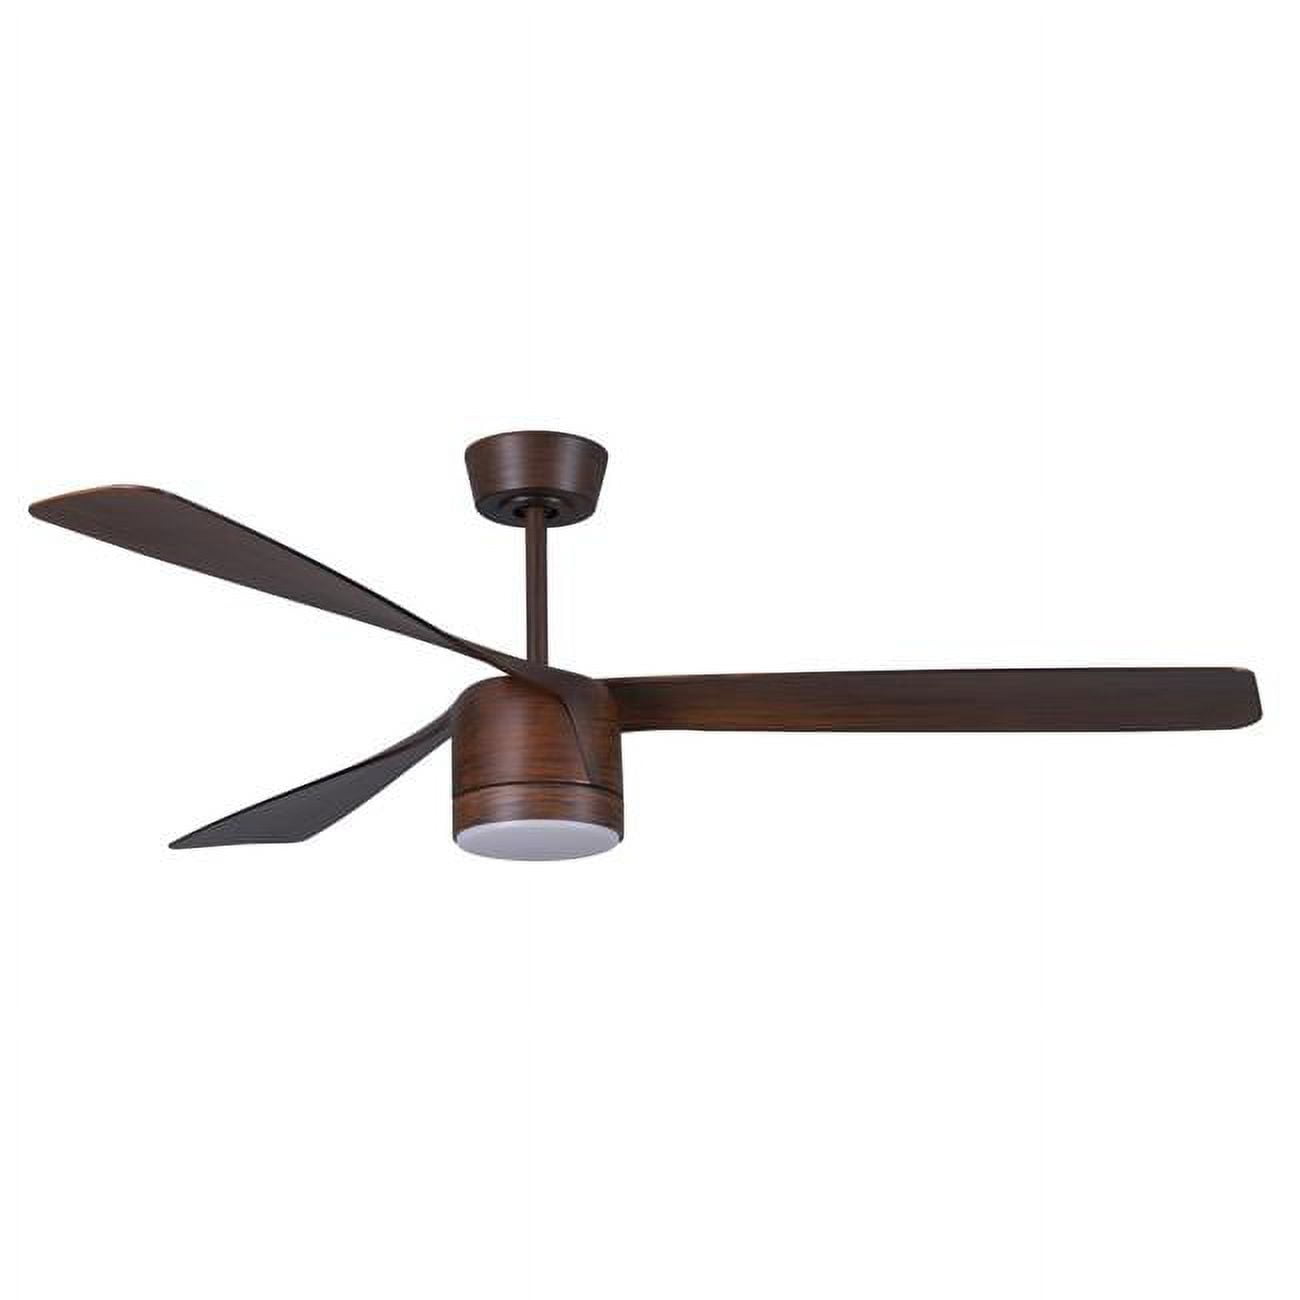 Picture of Lucci Air 21328201 Lucci Air Peregrine 56&apos; Dark Koa Light with Remote Ceiling Fan